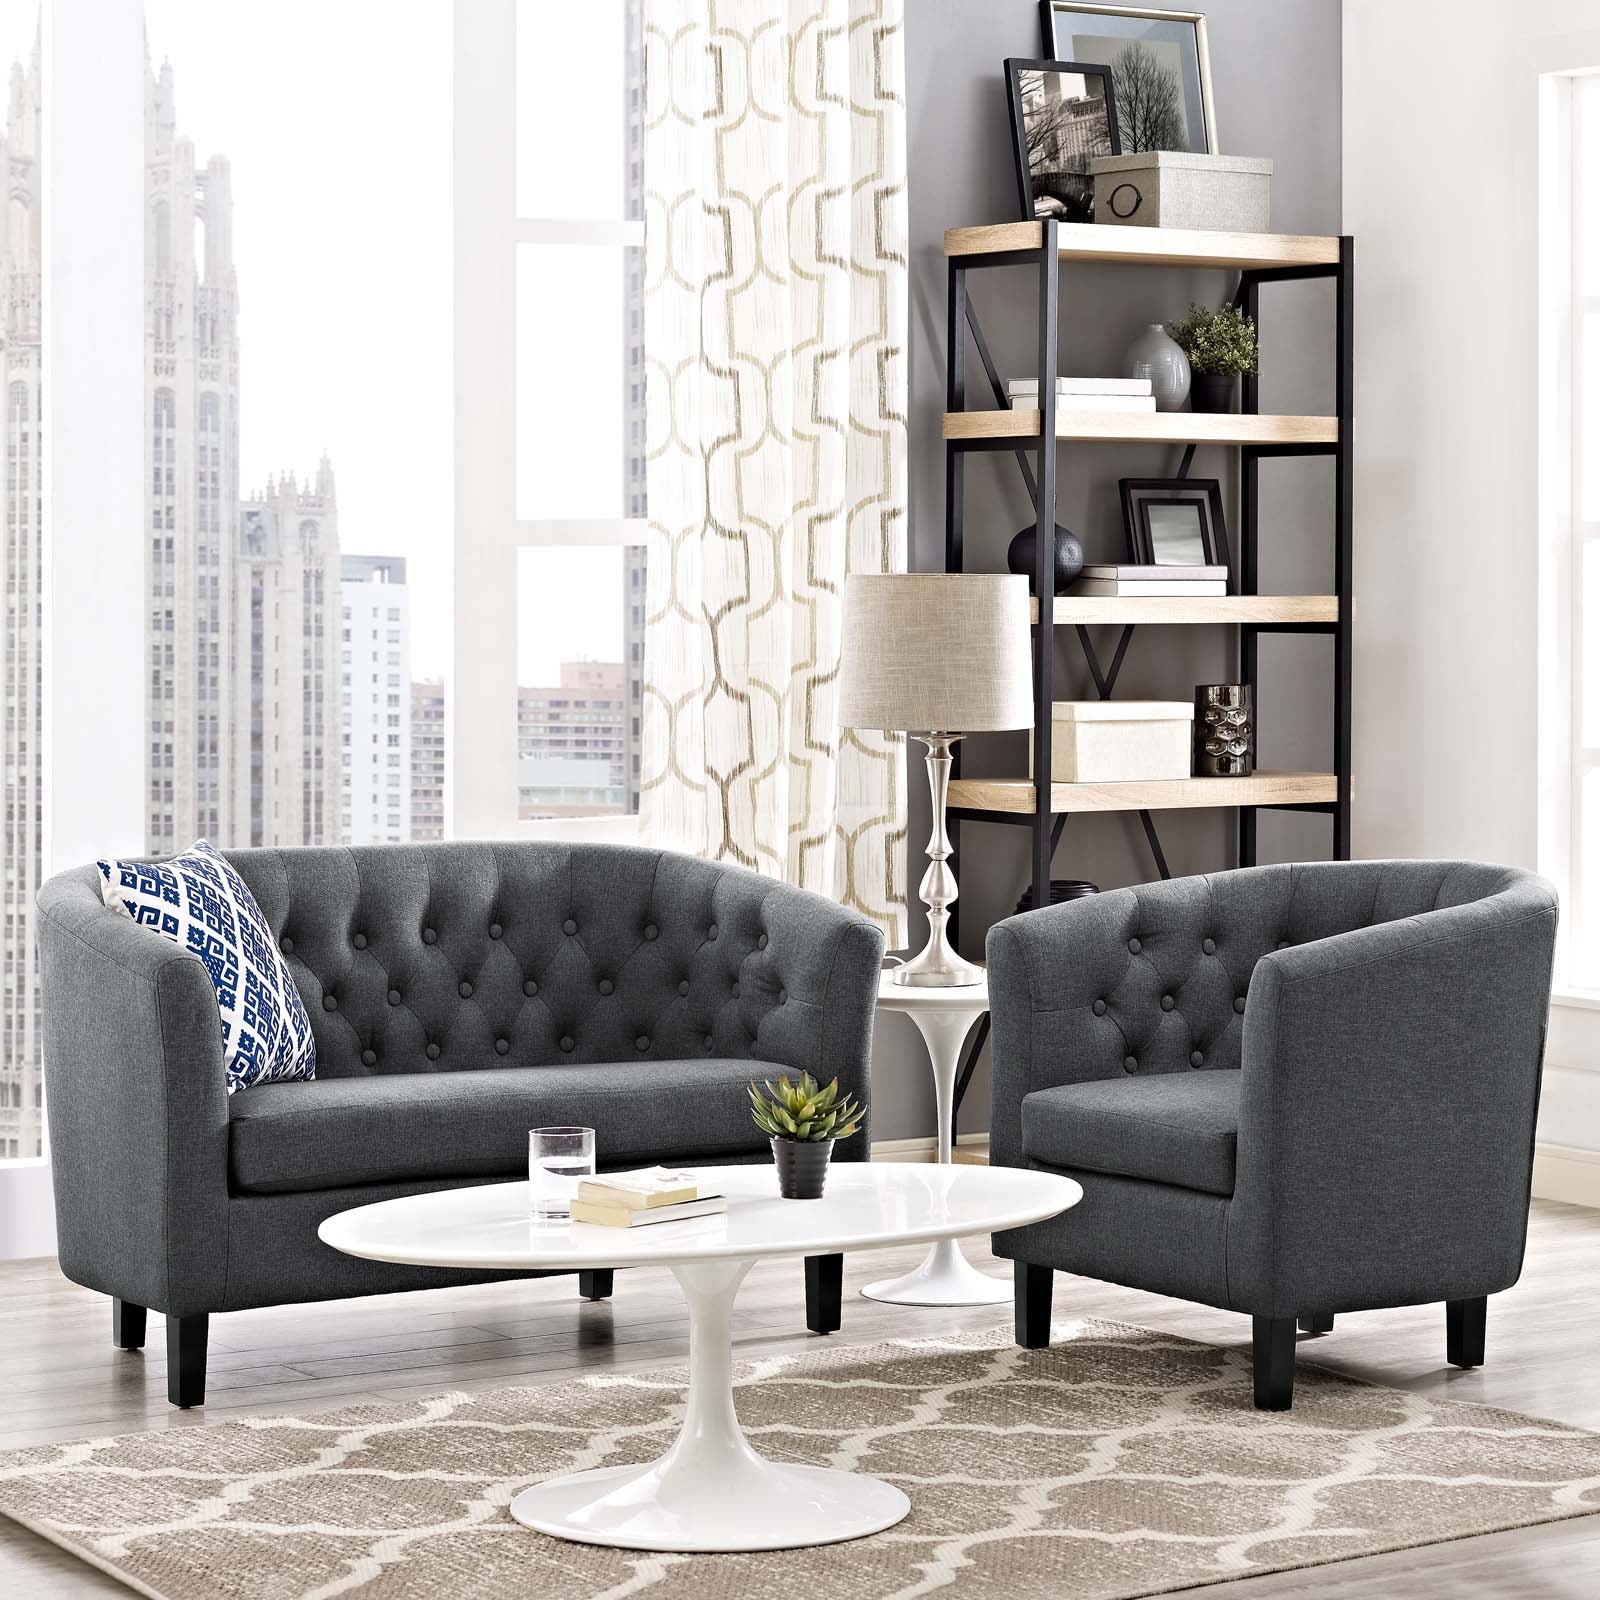 Modway Living Room Sets - Prospect 2 Piece Upholstered Fabric Loveseat and Armchair Set Gray